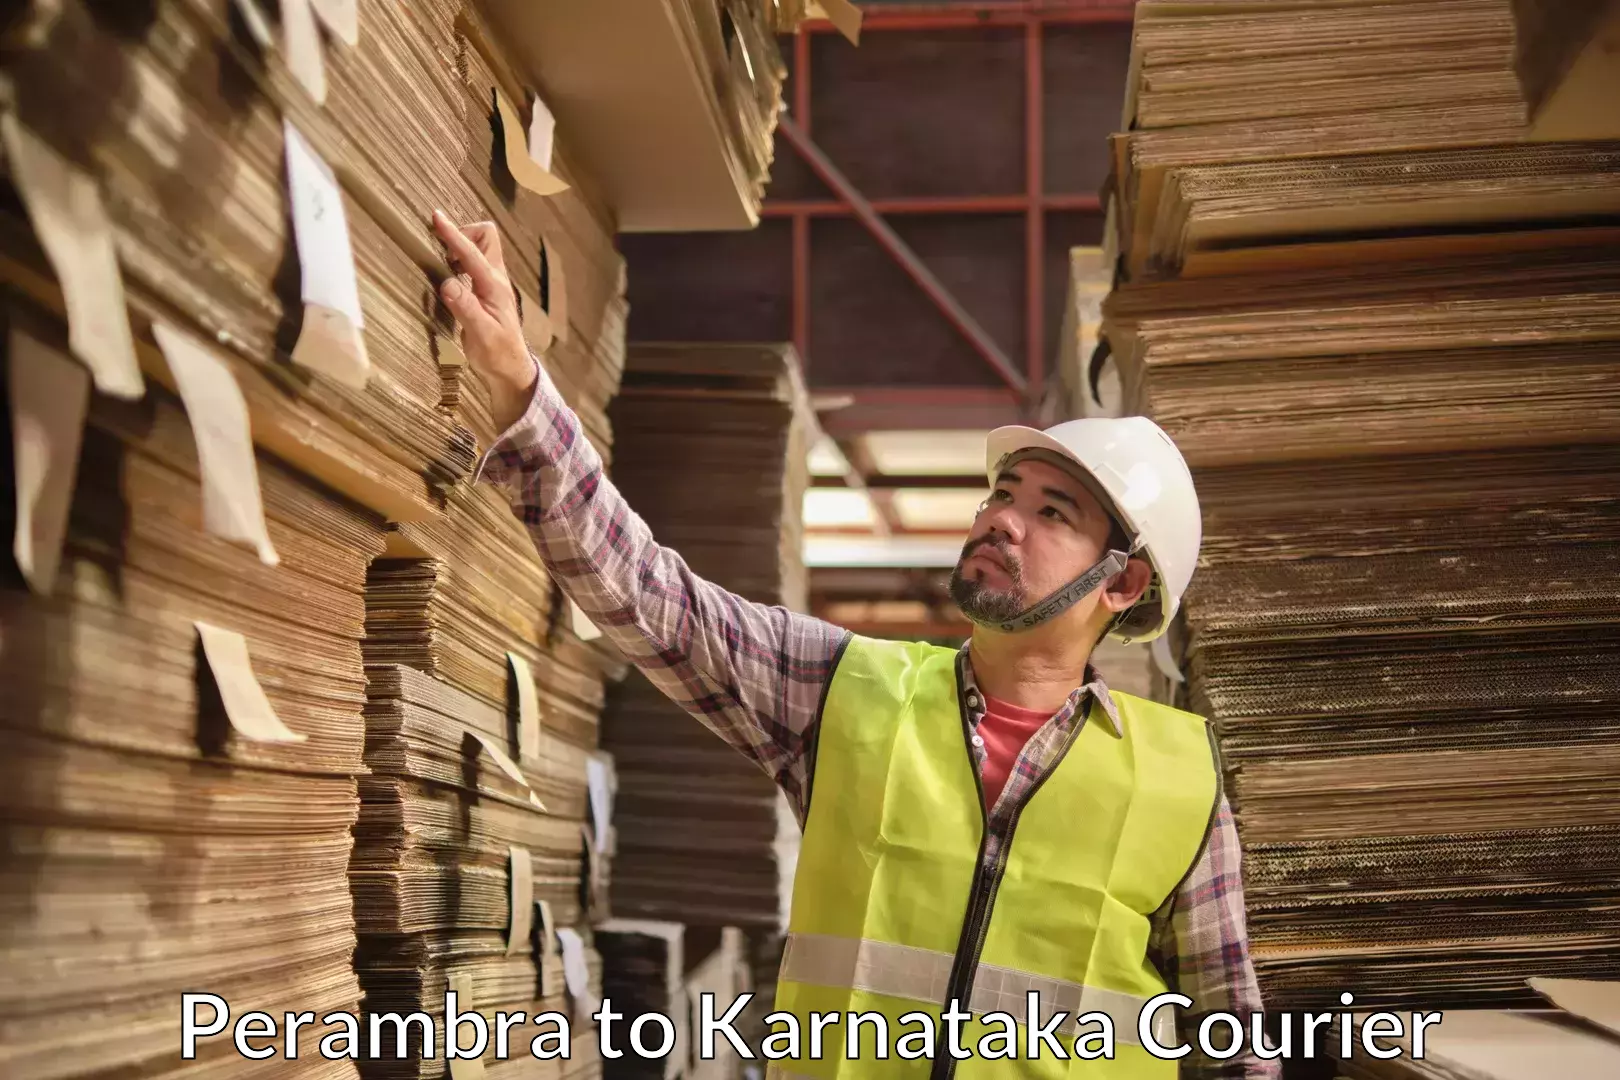 Quality relocation assistance in Perambra to Karnataka